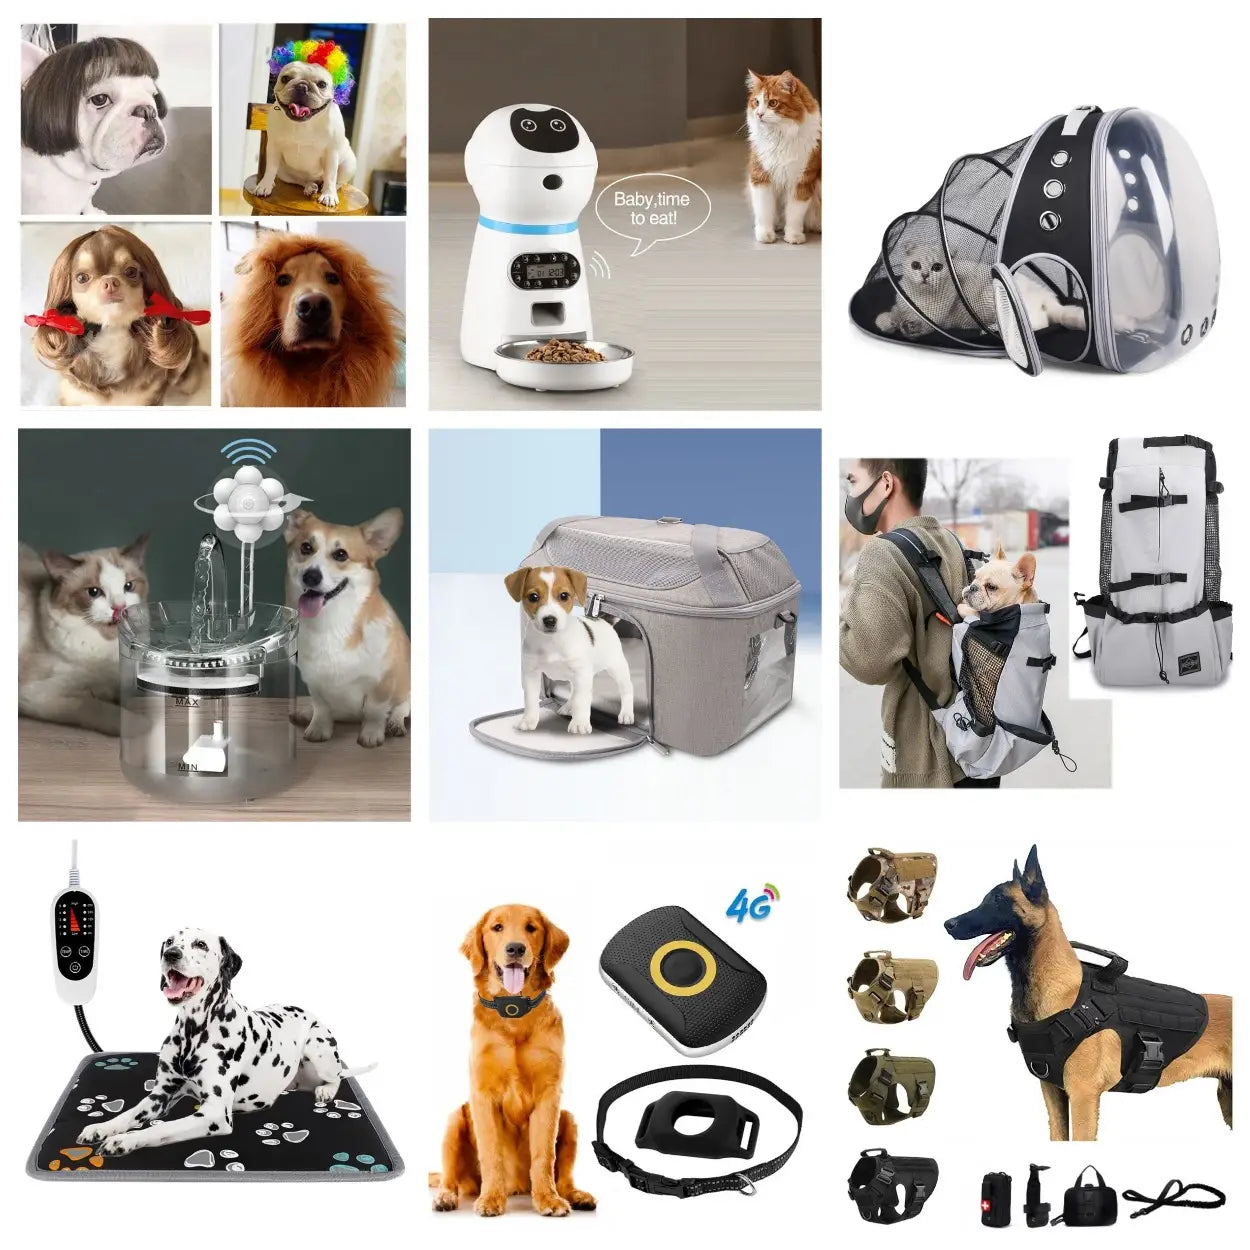 b. Accessories for pets